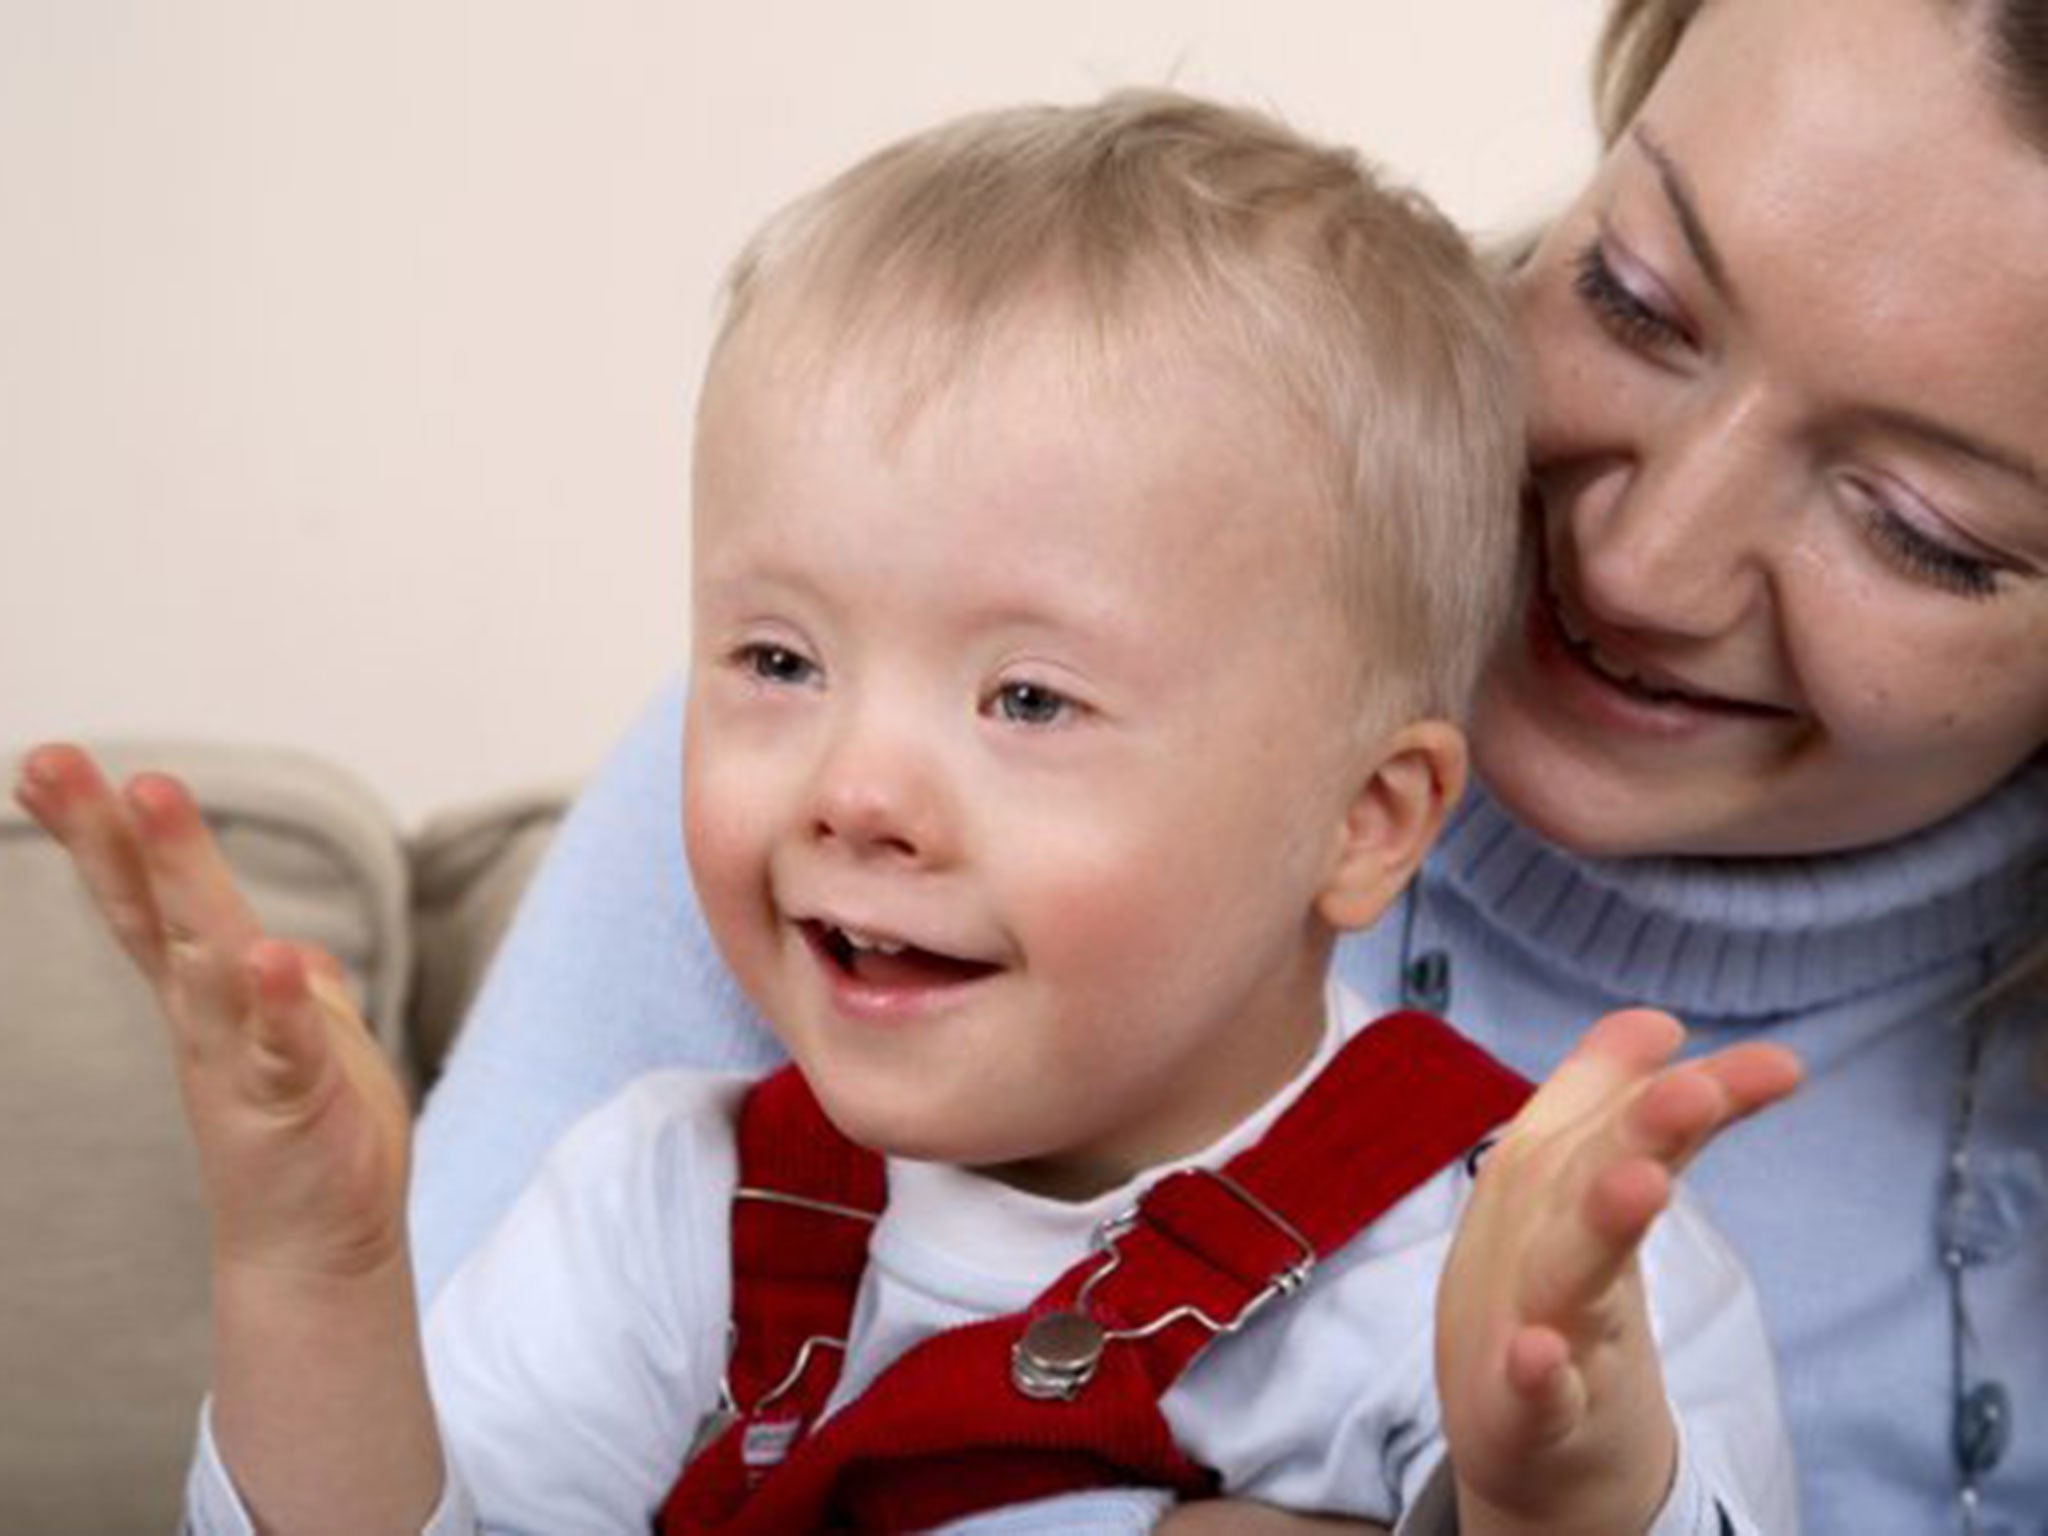 Eighty-six per cent of parent carers said they paid above-average childcare costs